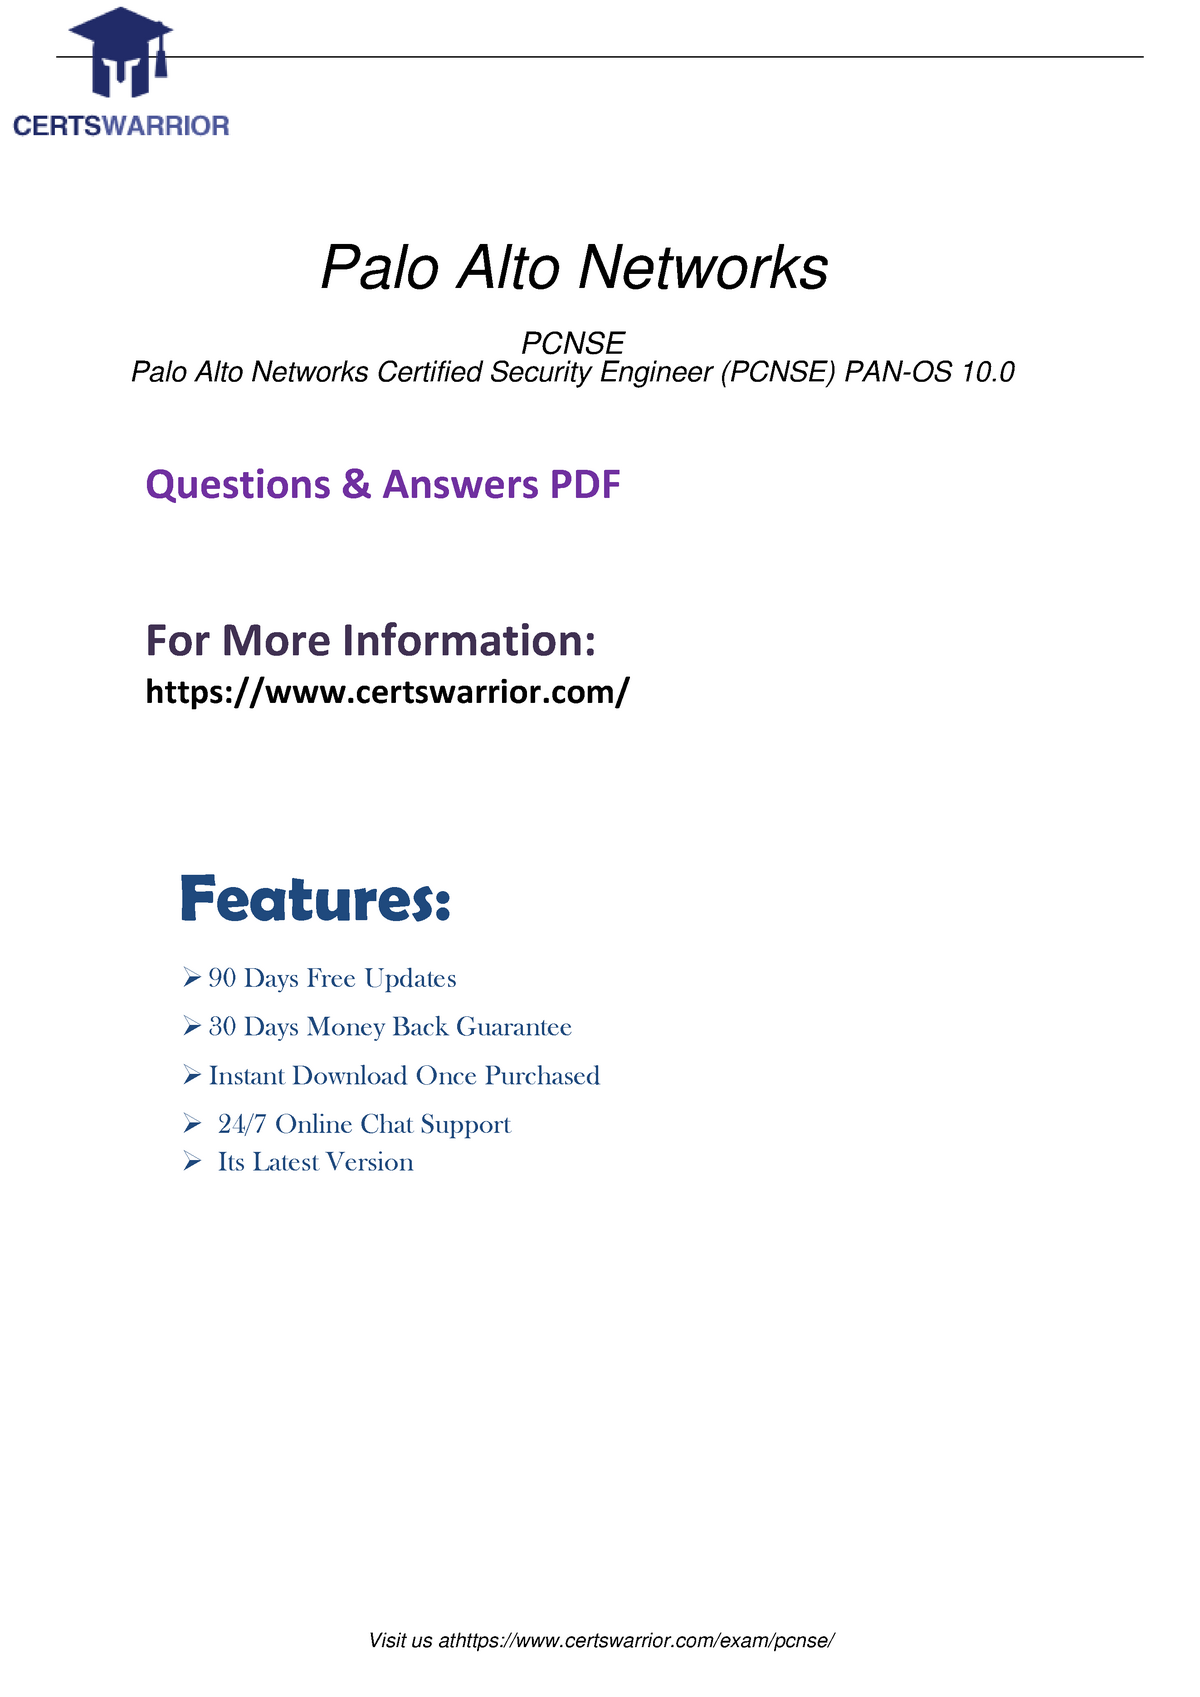 Palo Alto Networks Certified Security Engineer PAN-OS 255 Q&A PDF PCNSE 8 